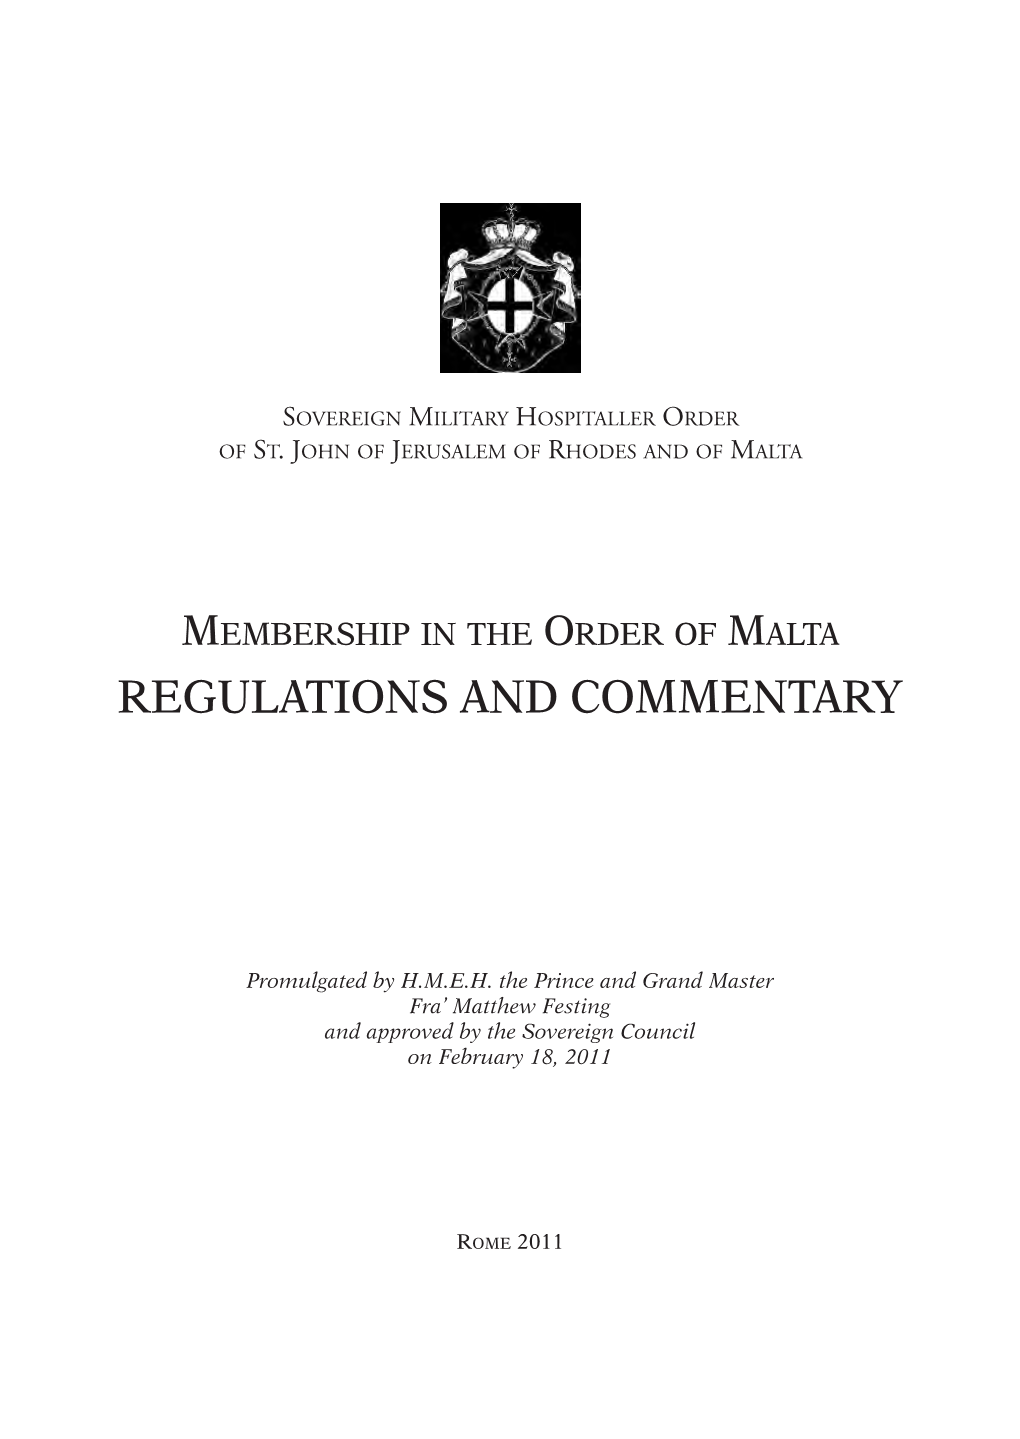 Regulations and Commentary